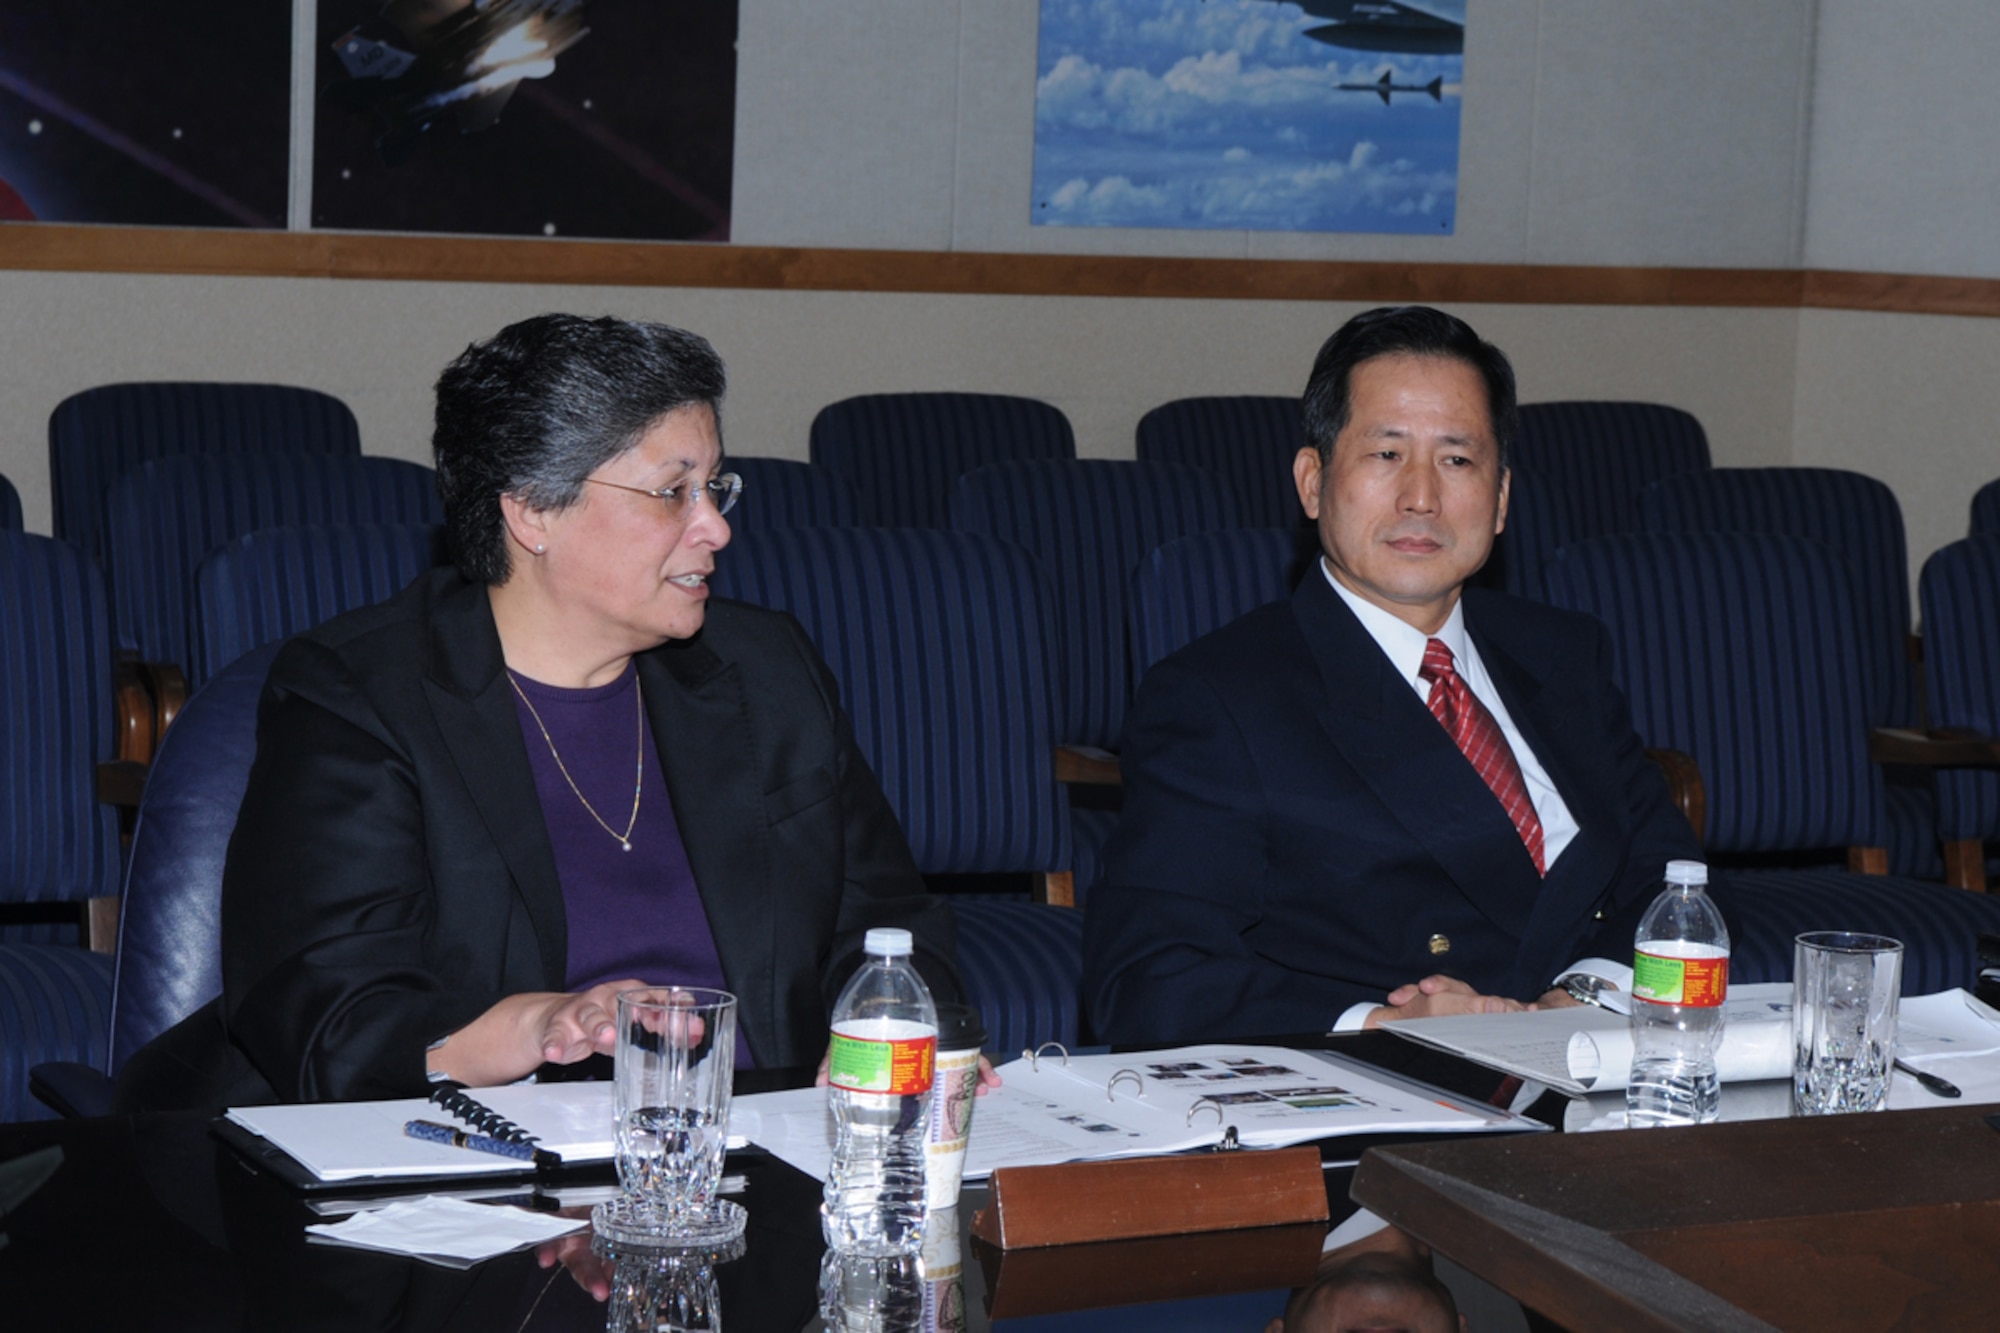 Taiwan air force visits AFPC to exchange personnel ideas > Air Force's